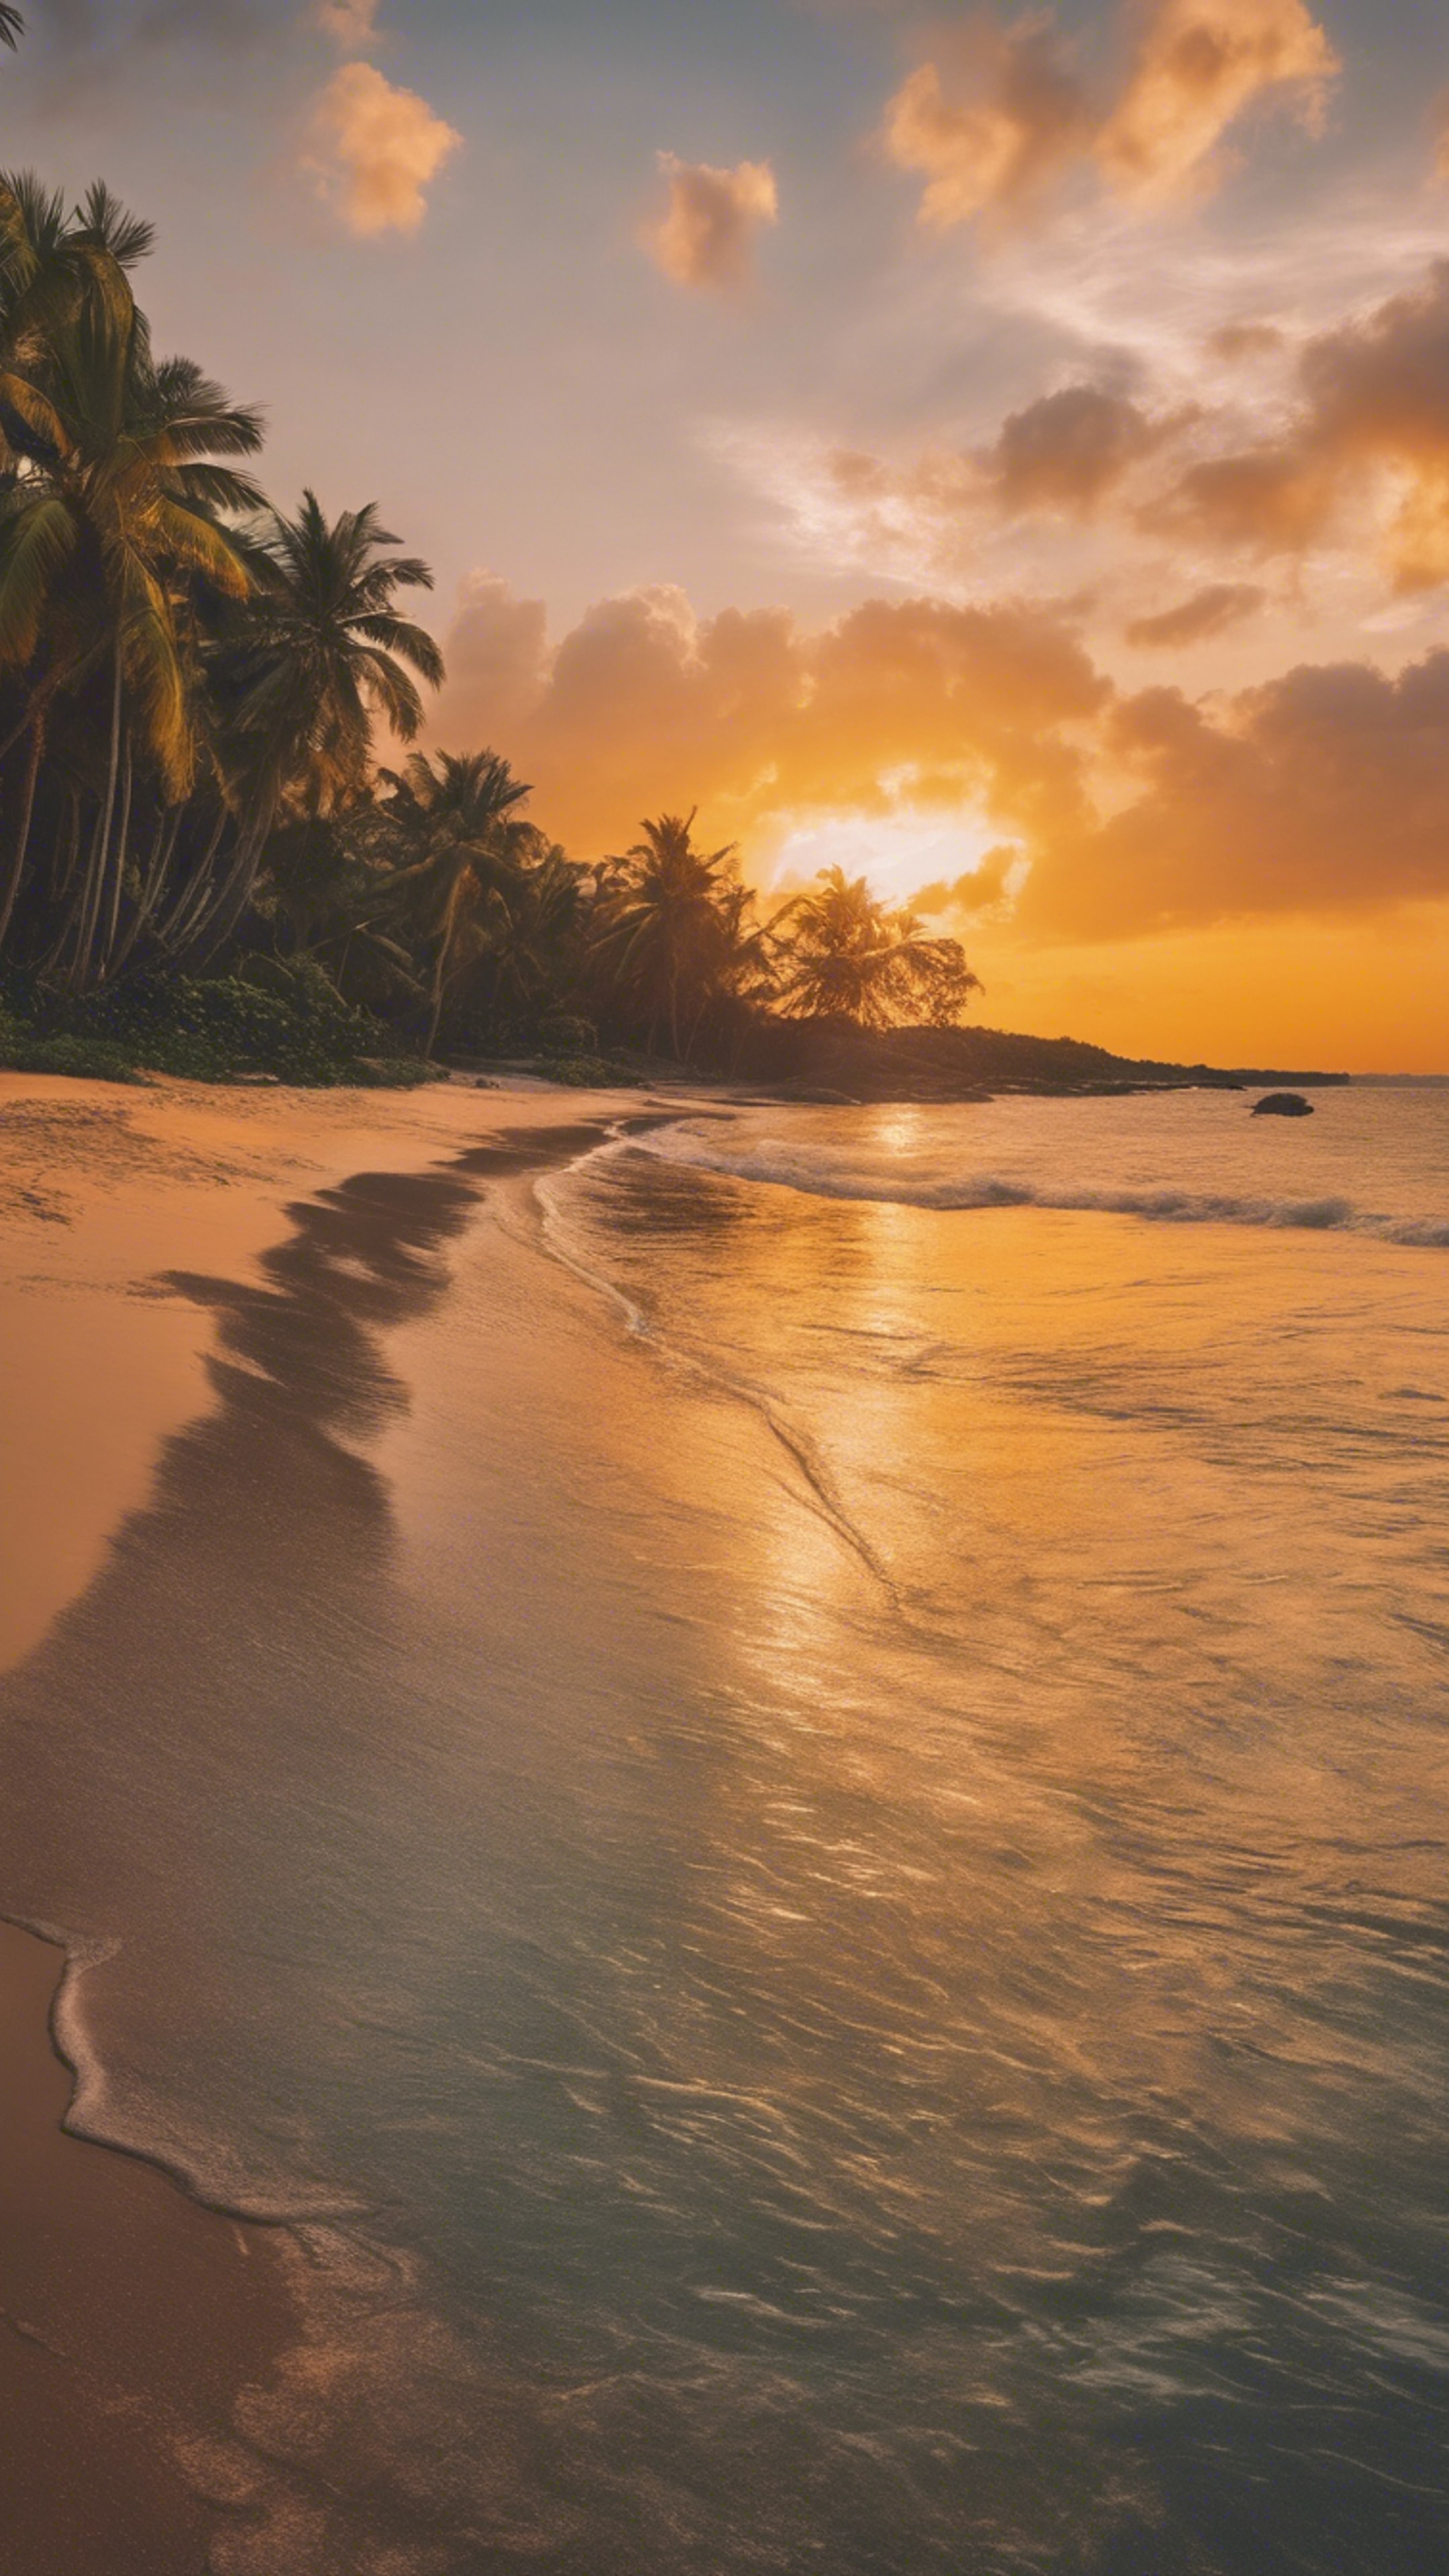 A tropical beach at sunset with hues of orange and yellow gently reflecting on the clear water. Ფონი[f1cd0a05f1594f21a6bf]